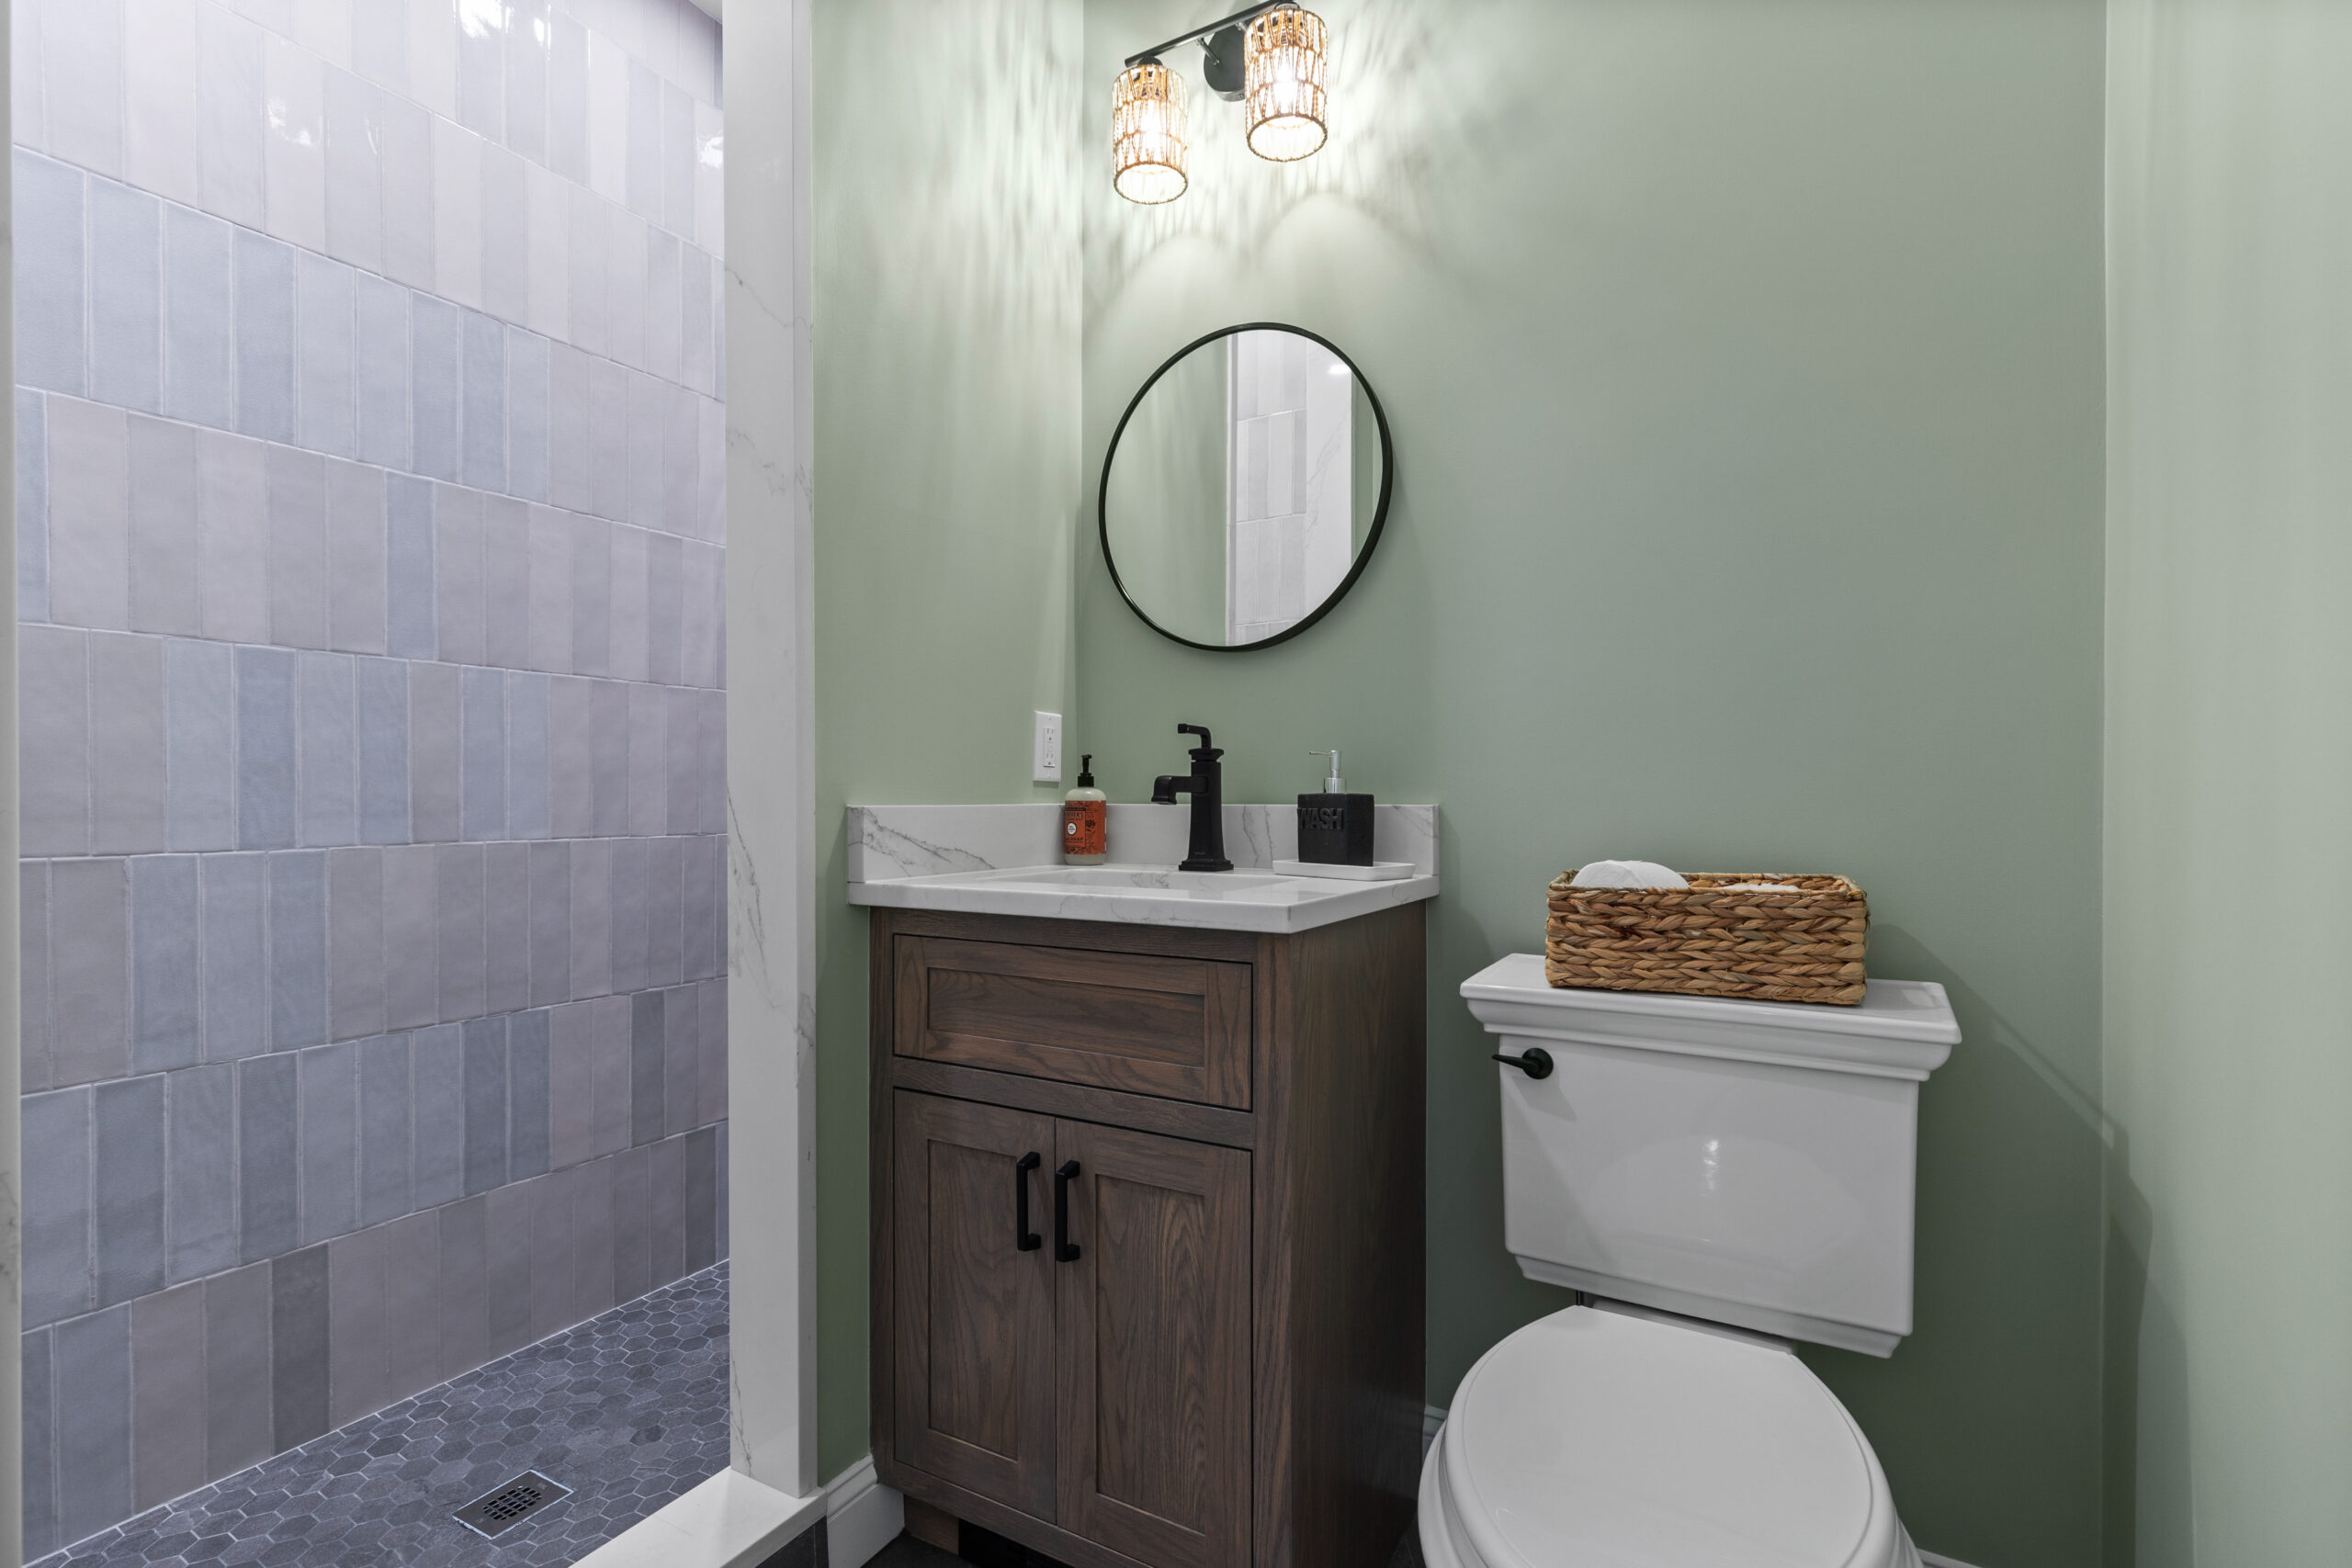 Beautifully renovated bathroom in a vintage New England home, featuring a modern vanity, chic mirror, and a stylish walk-in shower with elegant varied crackled subway tilework."